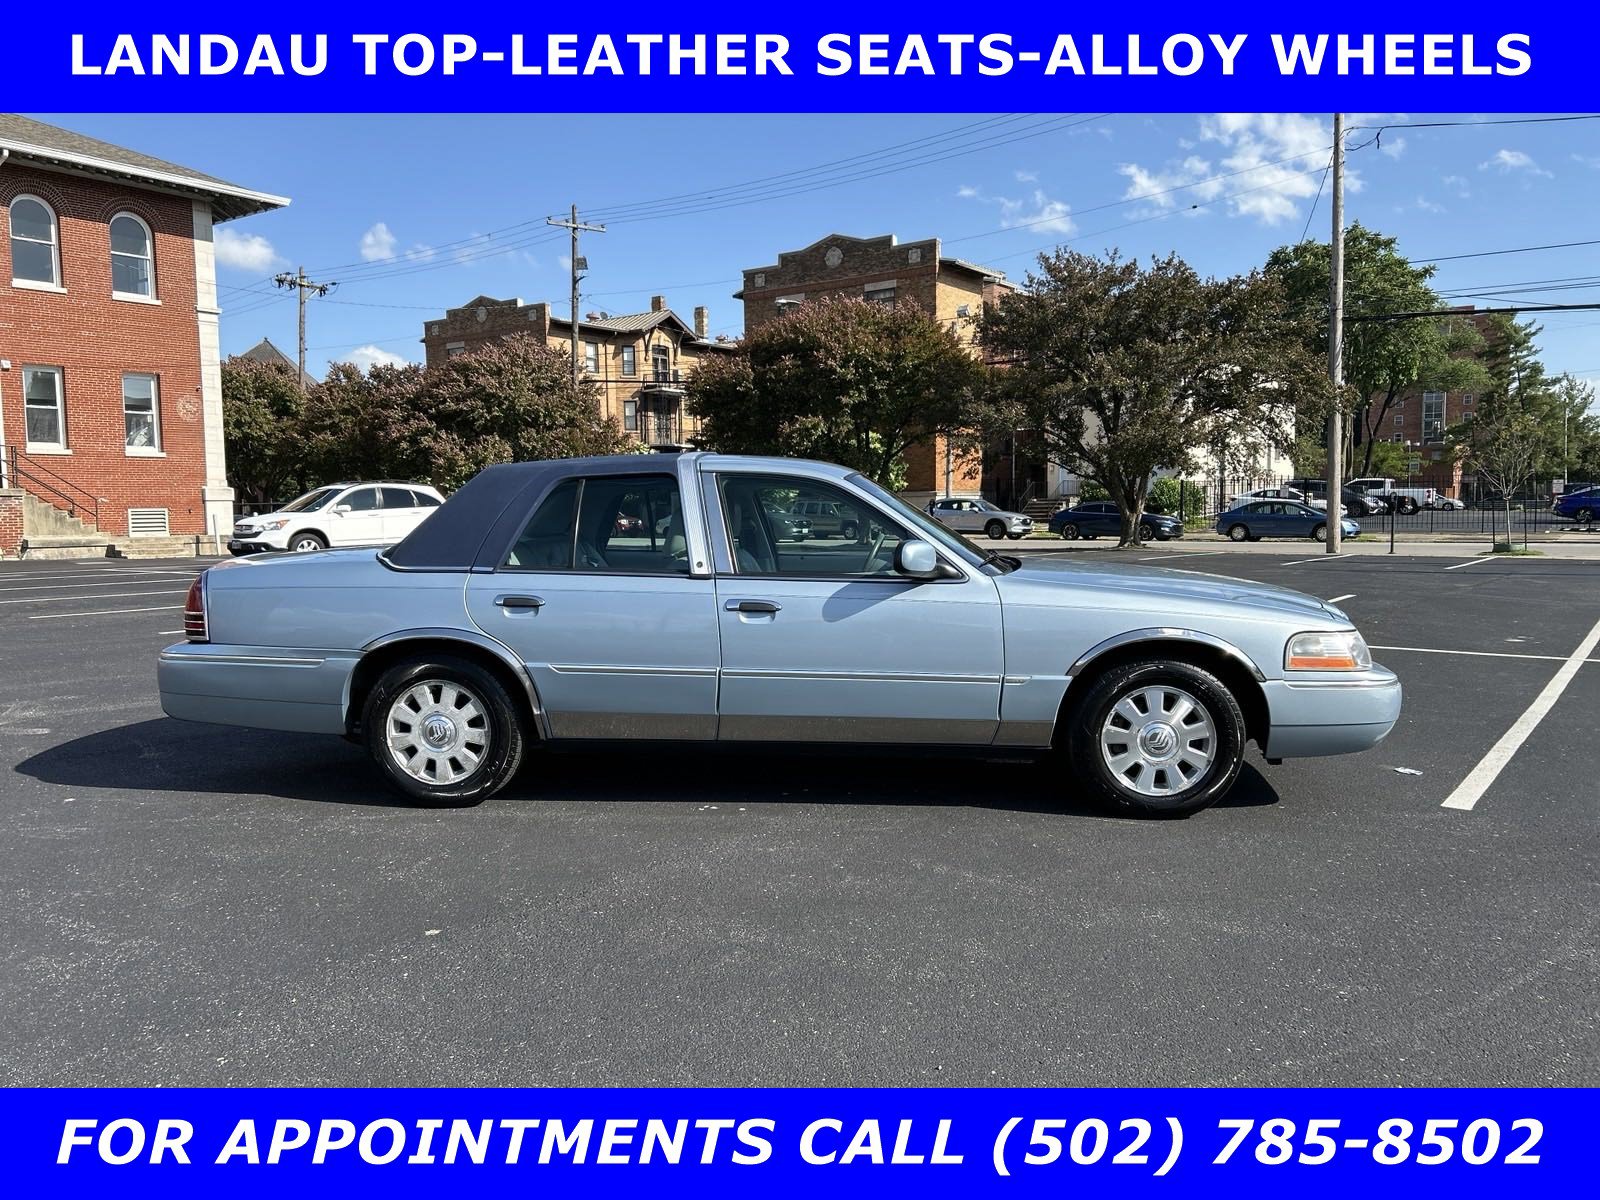 Used 2004 Mercury Grand Marquis LS with VIN 2MEHM75W94X616945 for sale in Louisville, KY